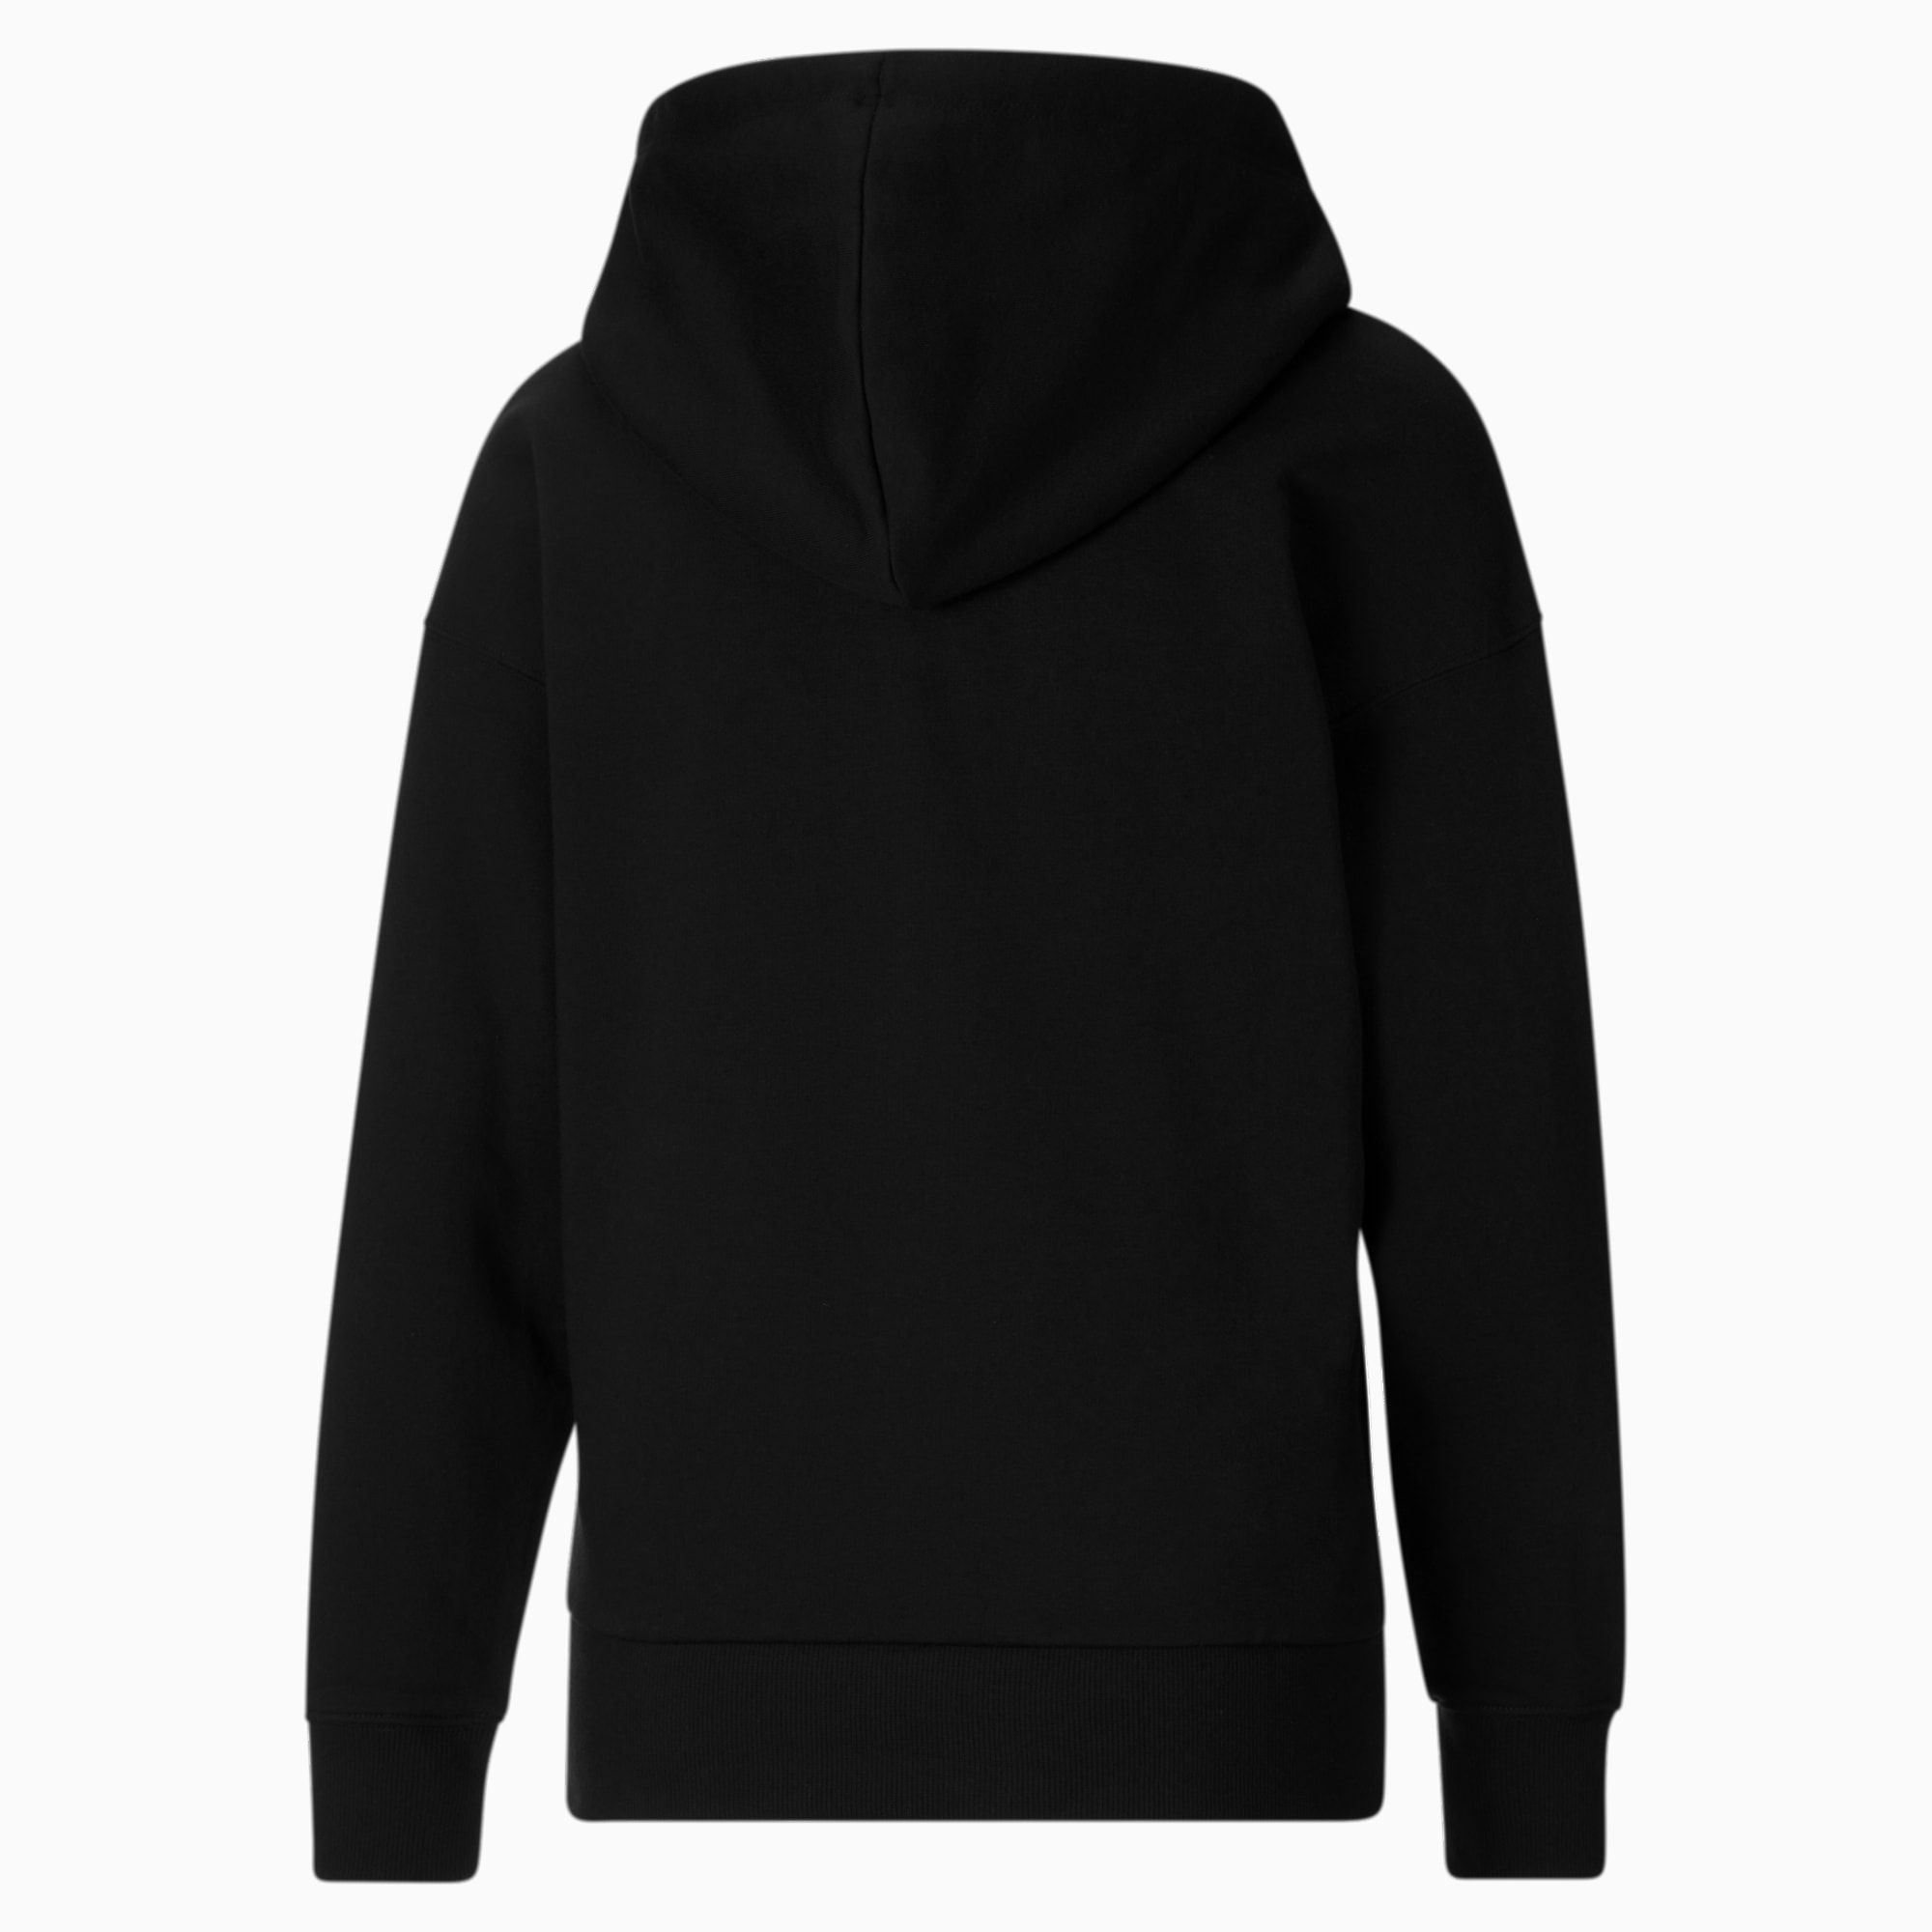 ▷ Chándal PUMA de Mujer Classic Hooded Sweat Suit